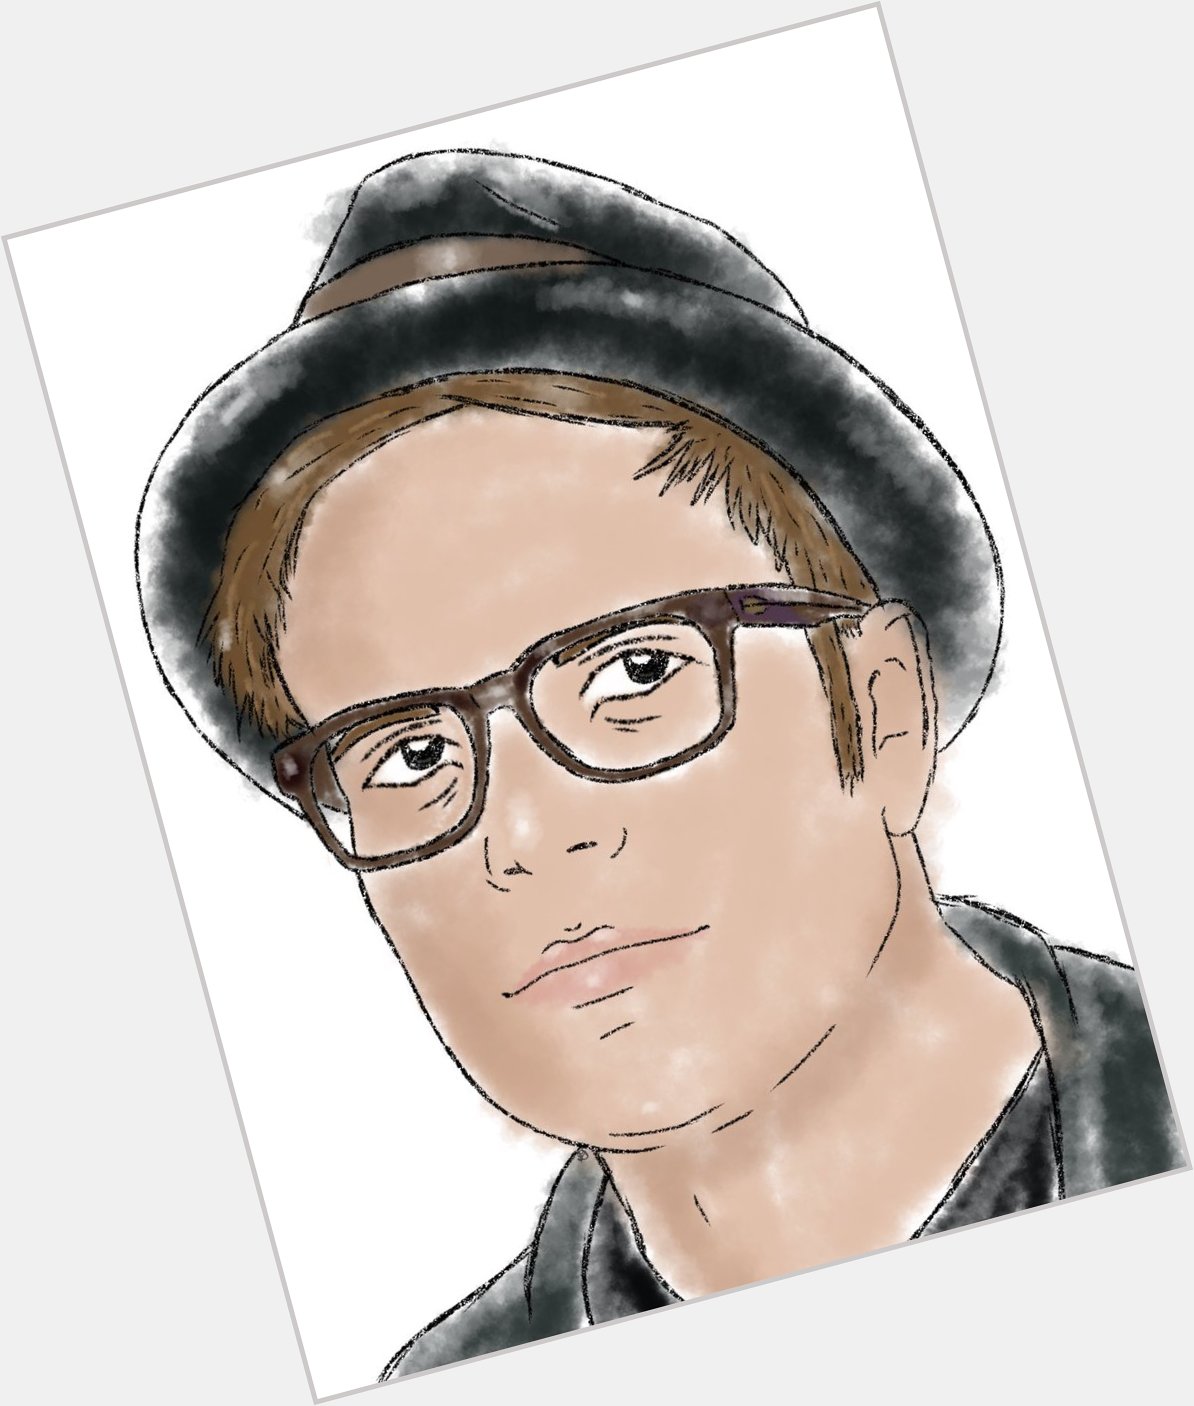 Happy Birthday to The Guy himself, Patrick Stump! I hope you have an awesome day!! 